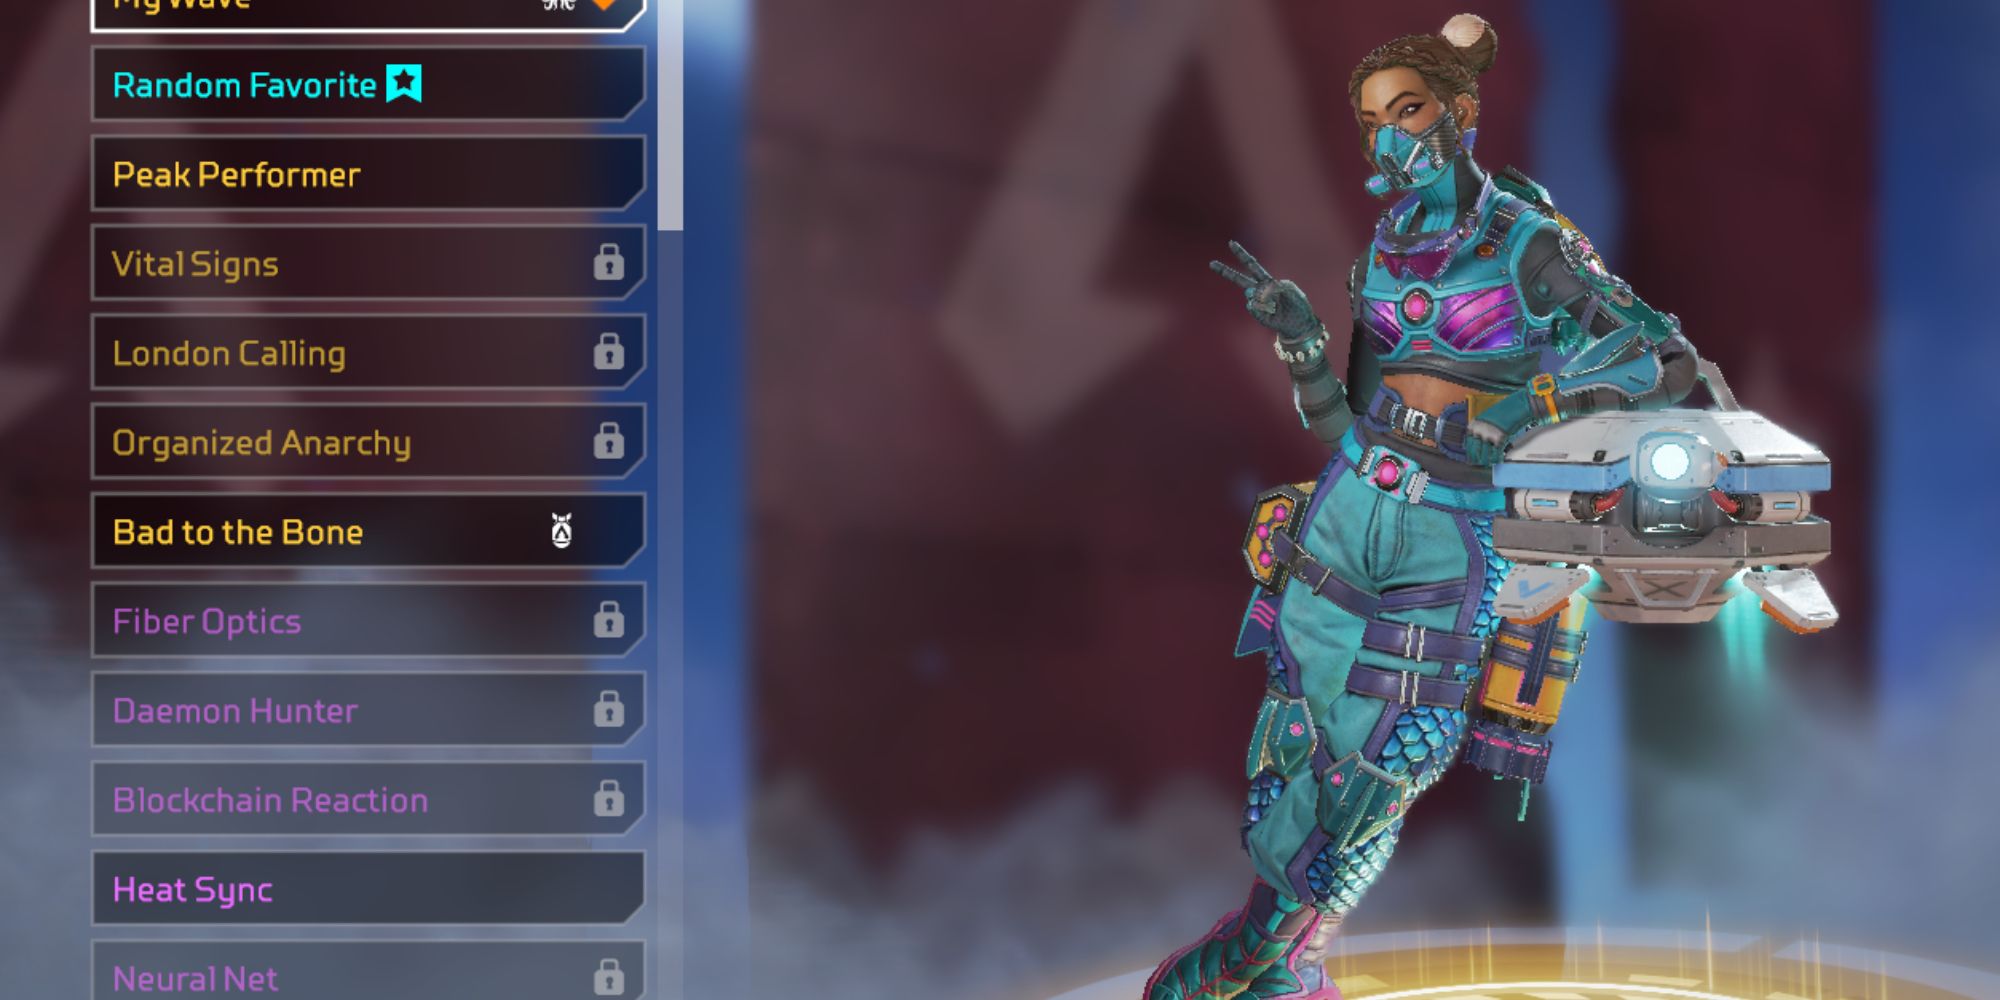 An image of Lifeline's My Wave skin from Apex Legends